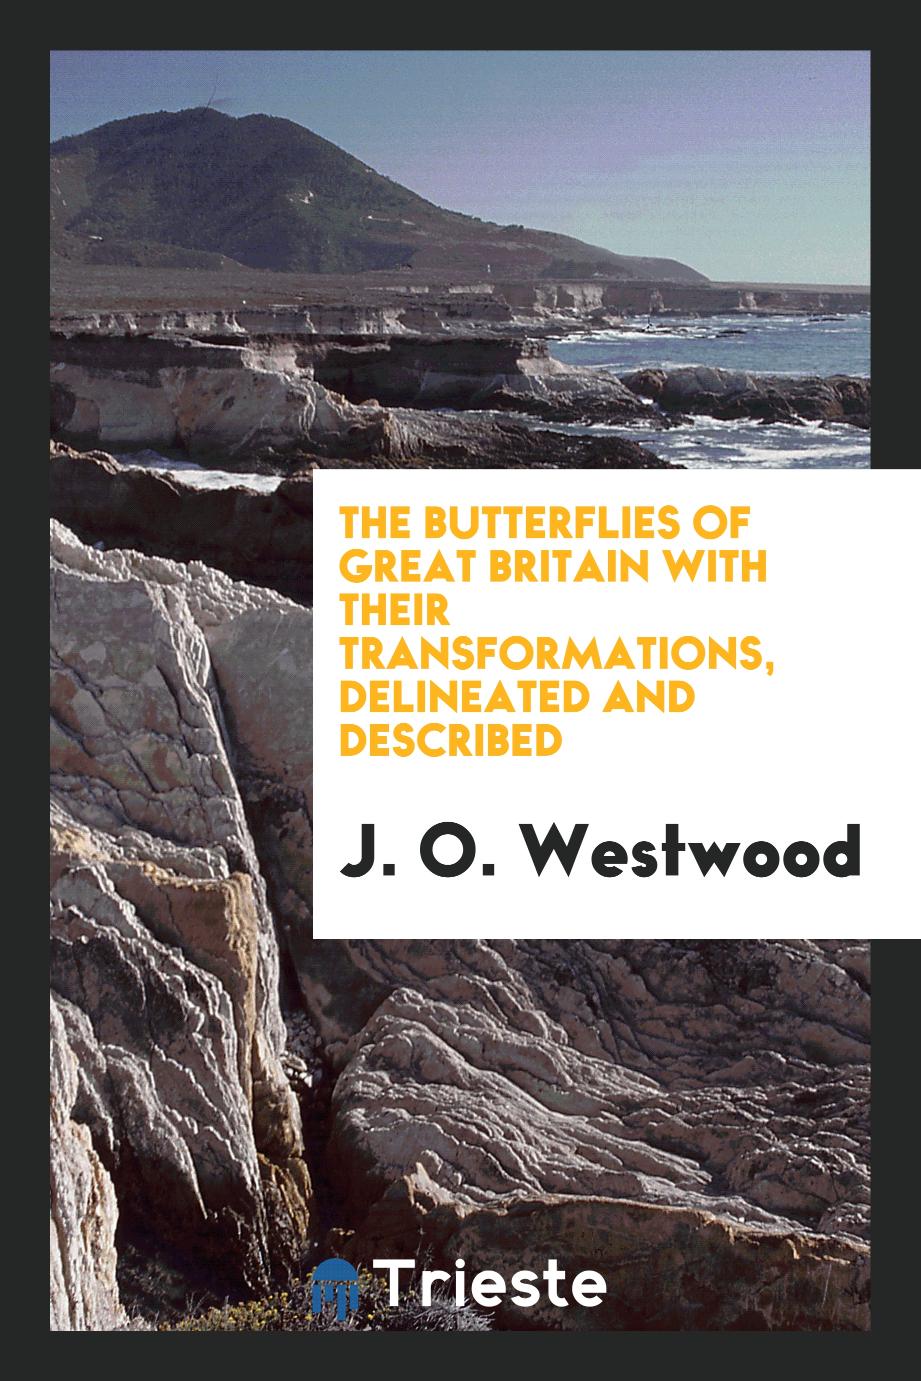 The Butterflies of Great Britain with Their Transformations, Delineated and Described